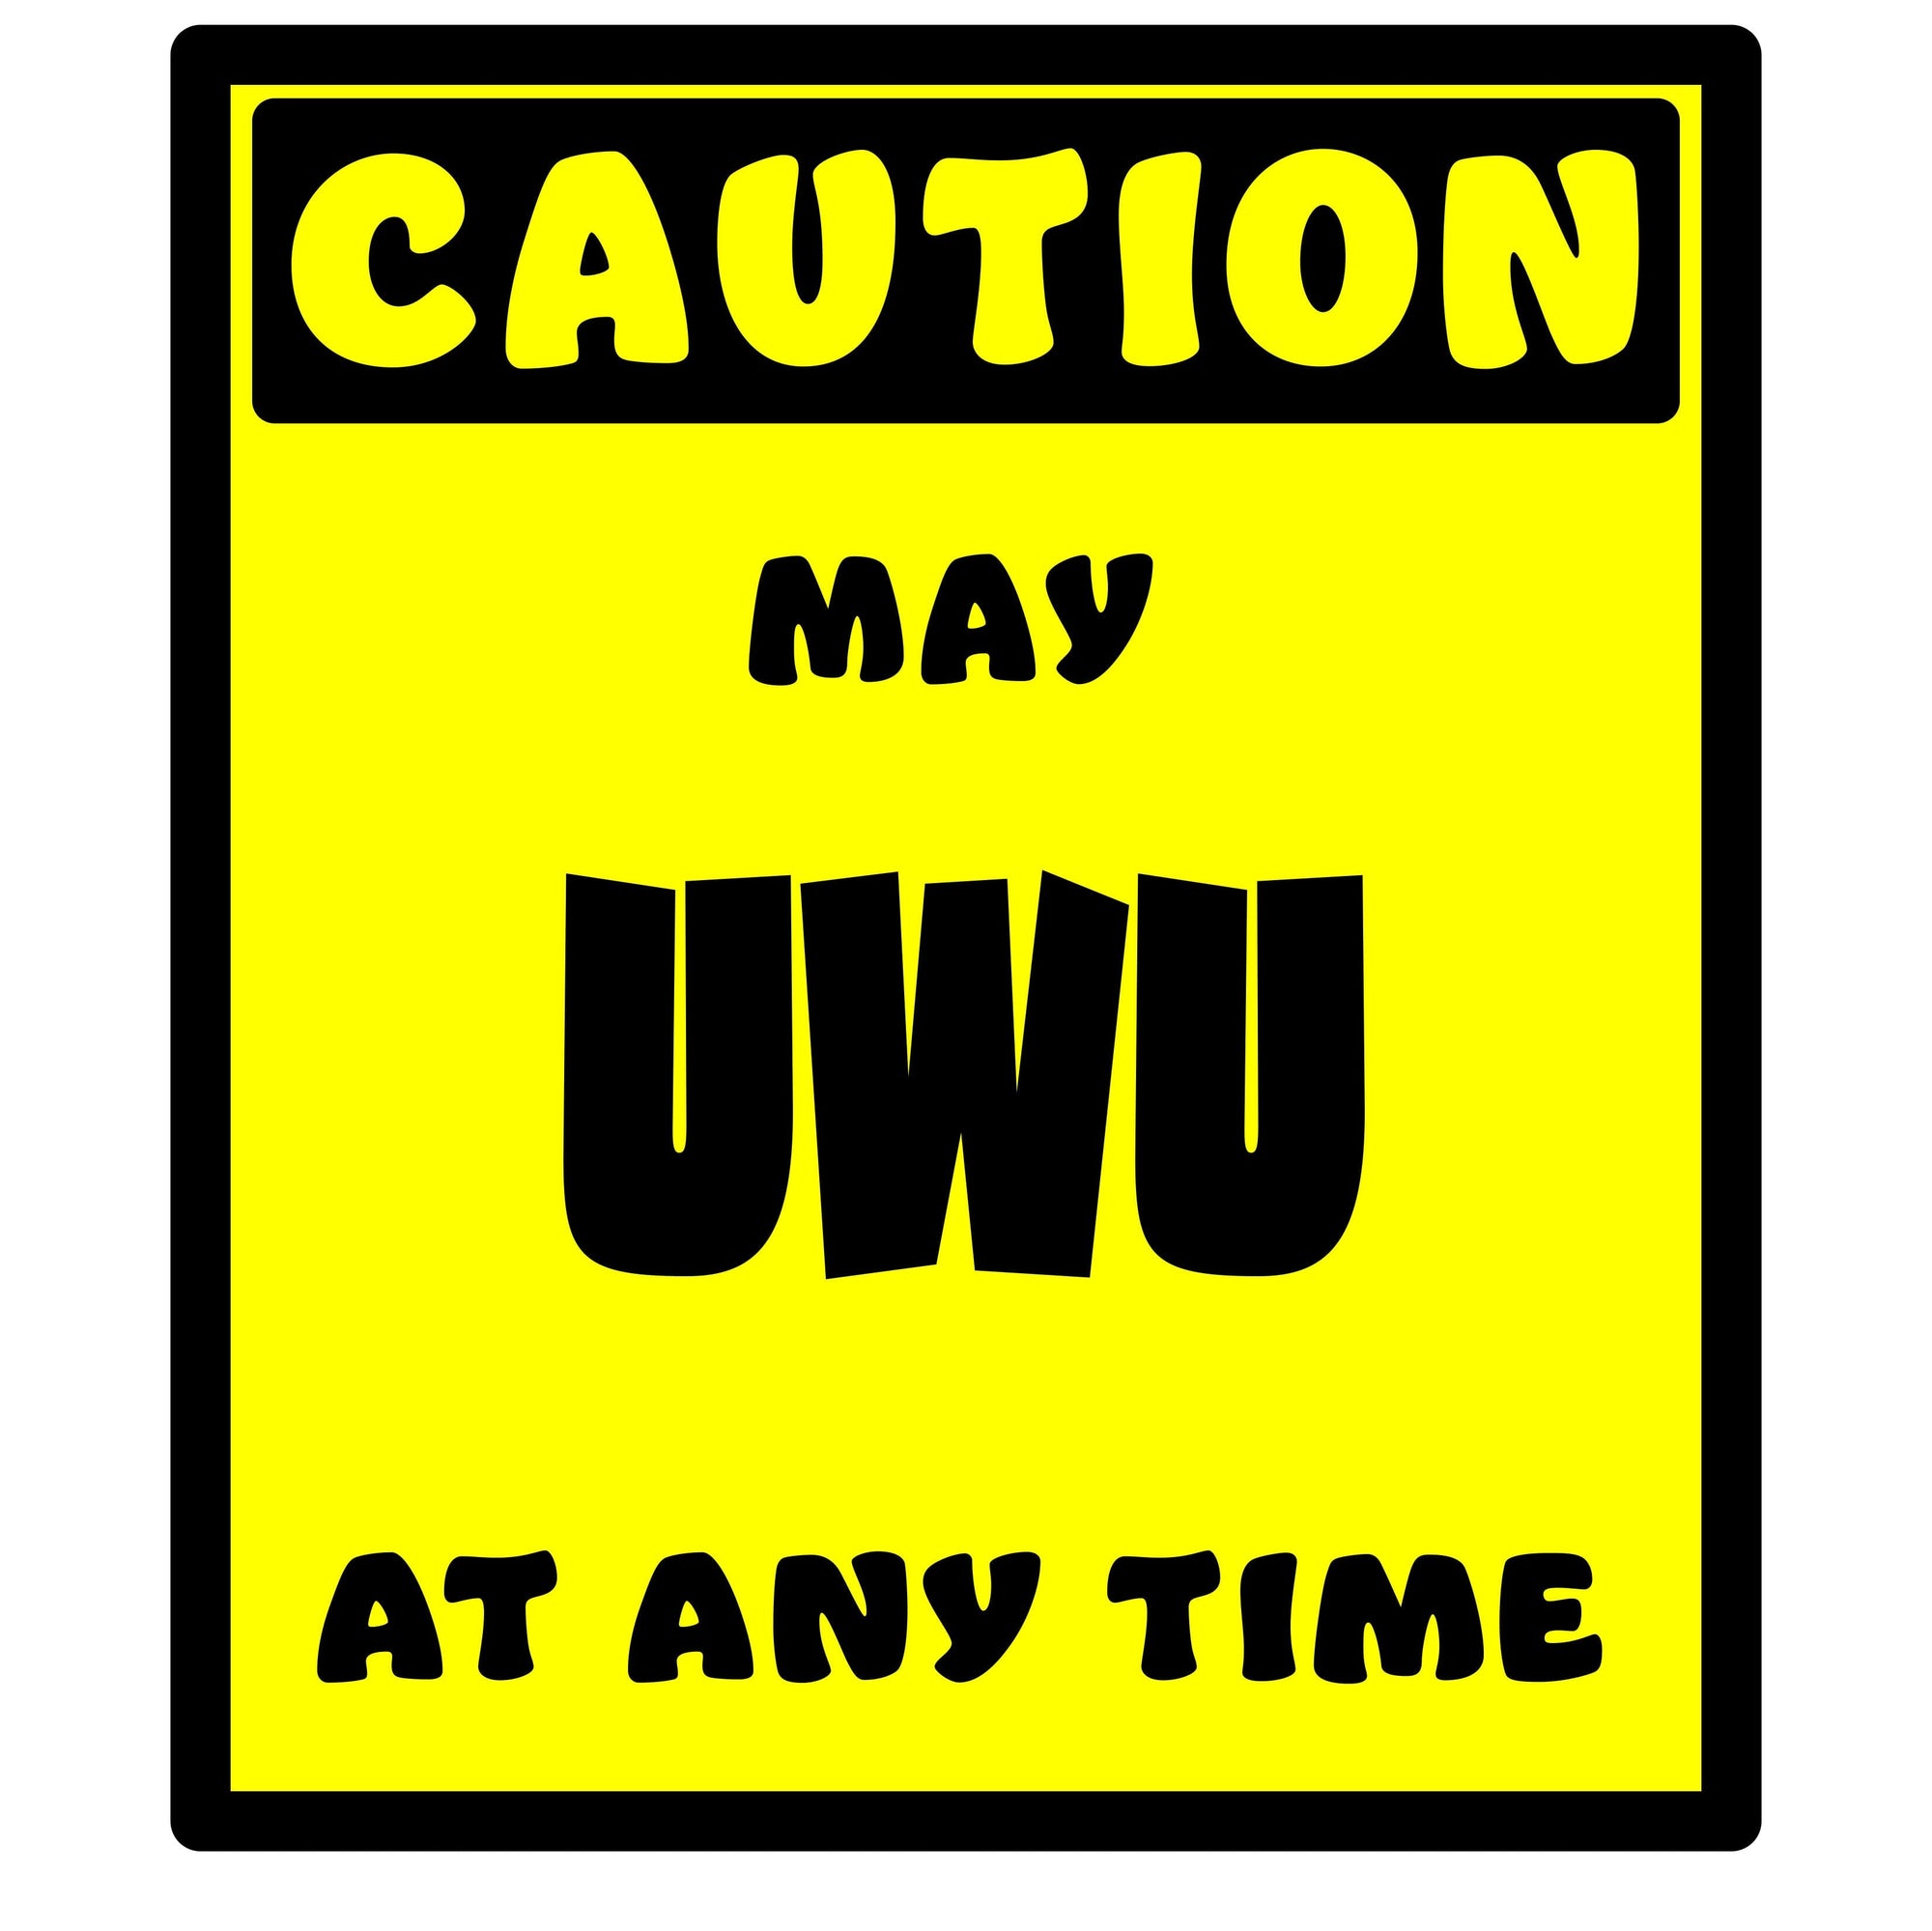 Whootorca - Caution! Series - CAUTION! May UWU at any time!